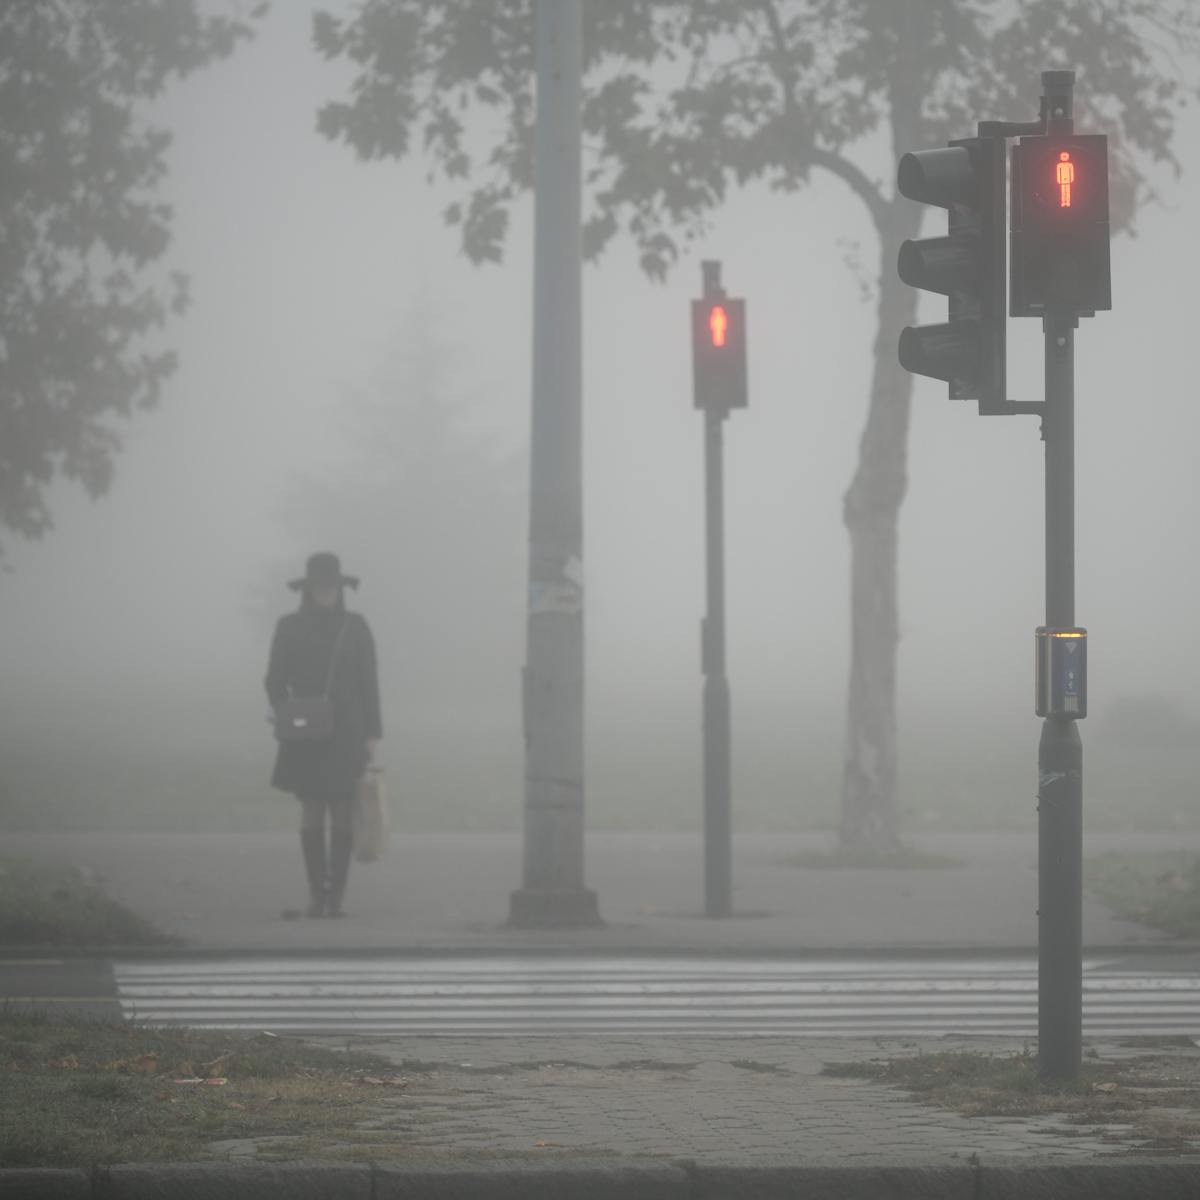 Photograph of a pedestrian crossing. On the far side of the crossing is a dark sillhouette of a woman, wearing a long coat and hat. There are several trees around her. There are two pedestrian crossing lights lit up red, one on either side of the road. It is very misty and foggy, and the mist is occluding a tree in the distance. 